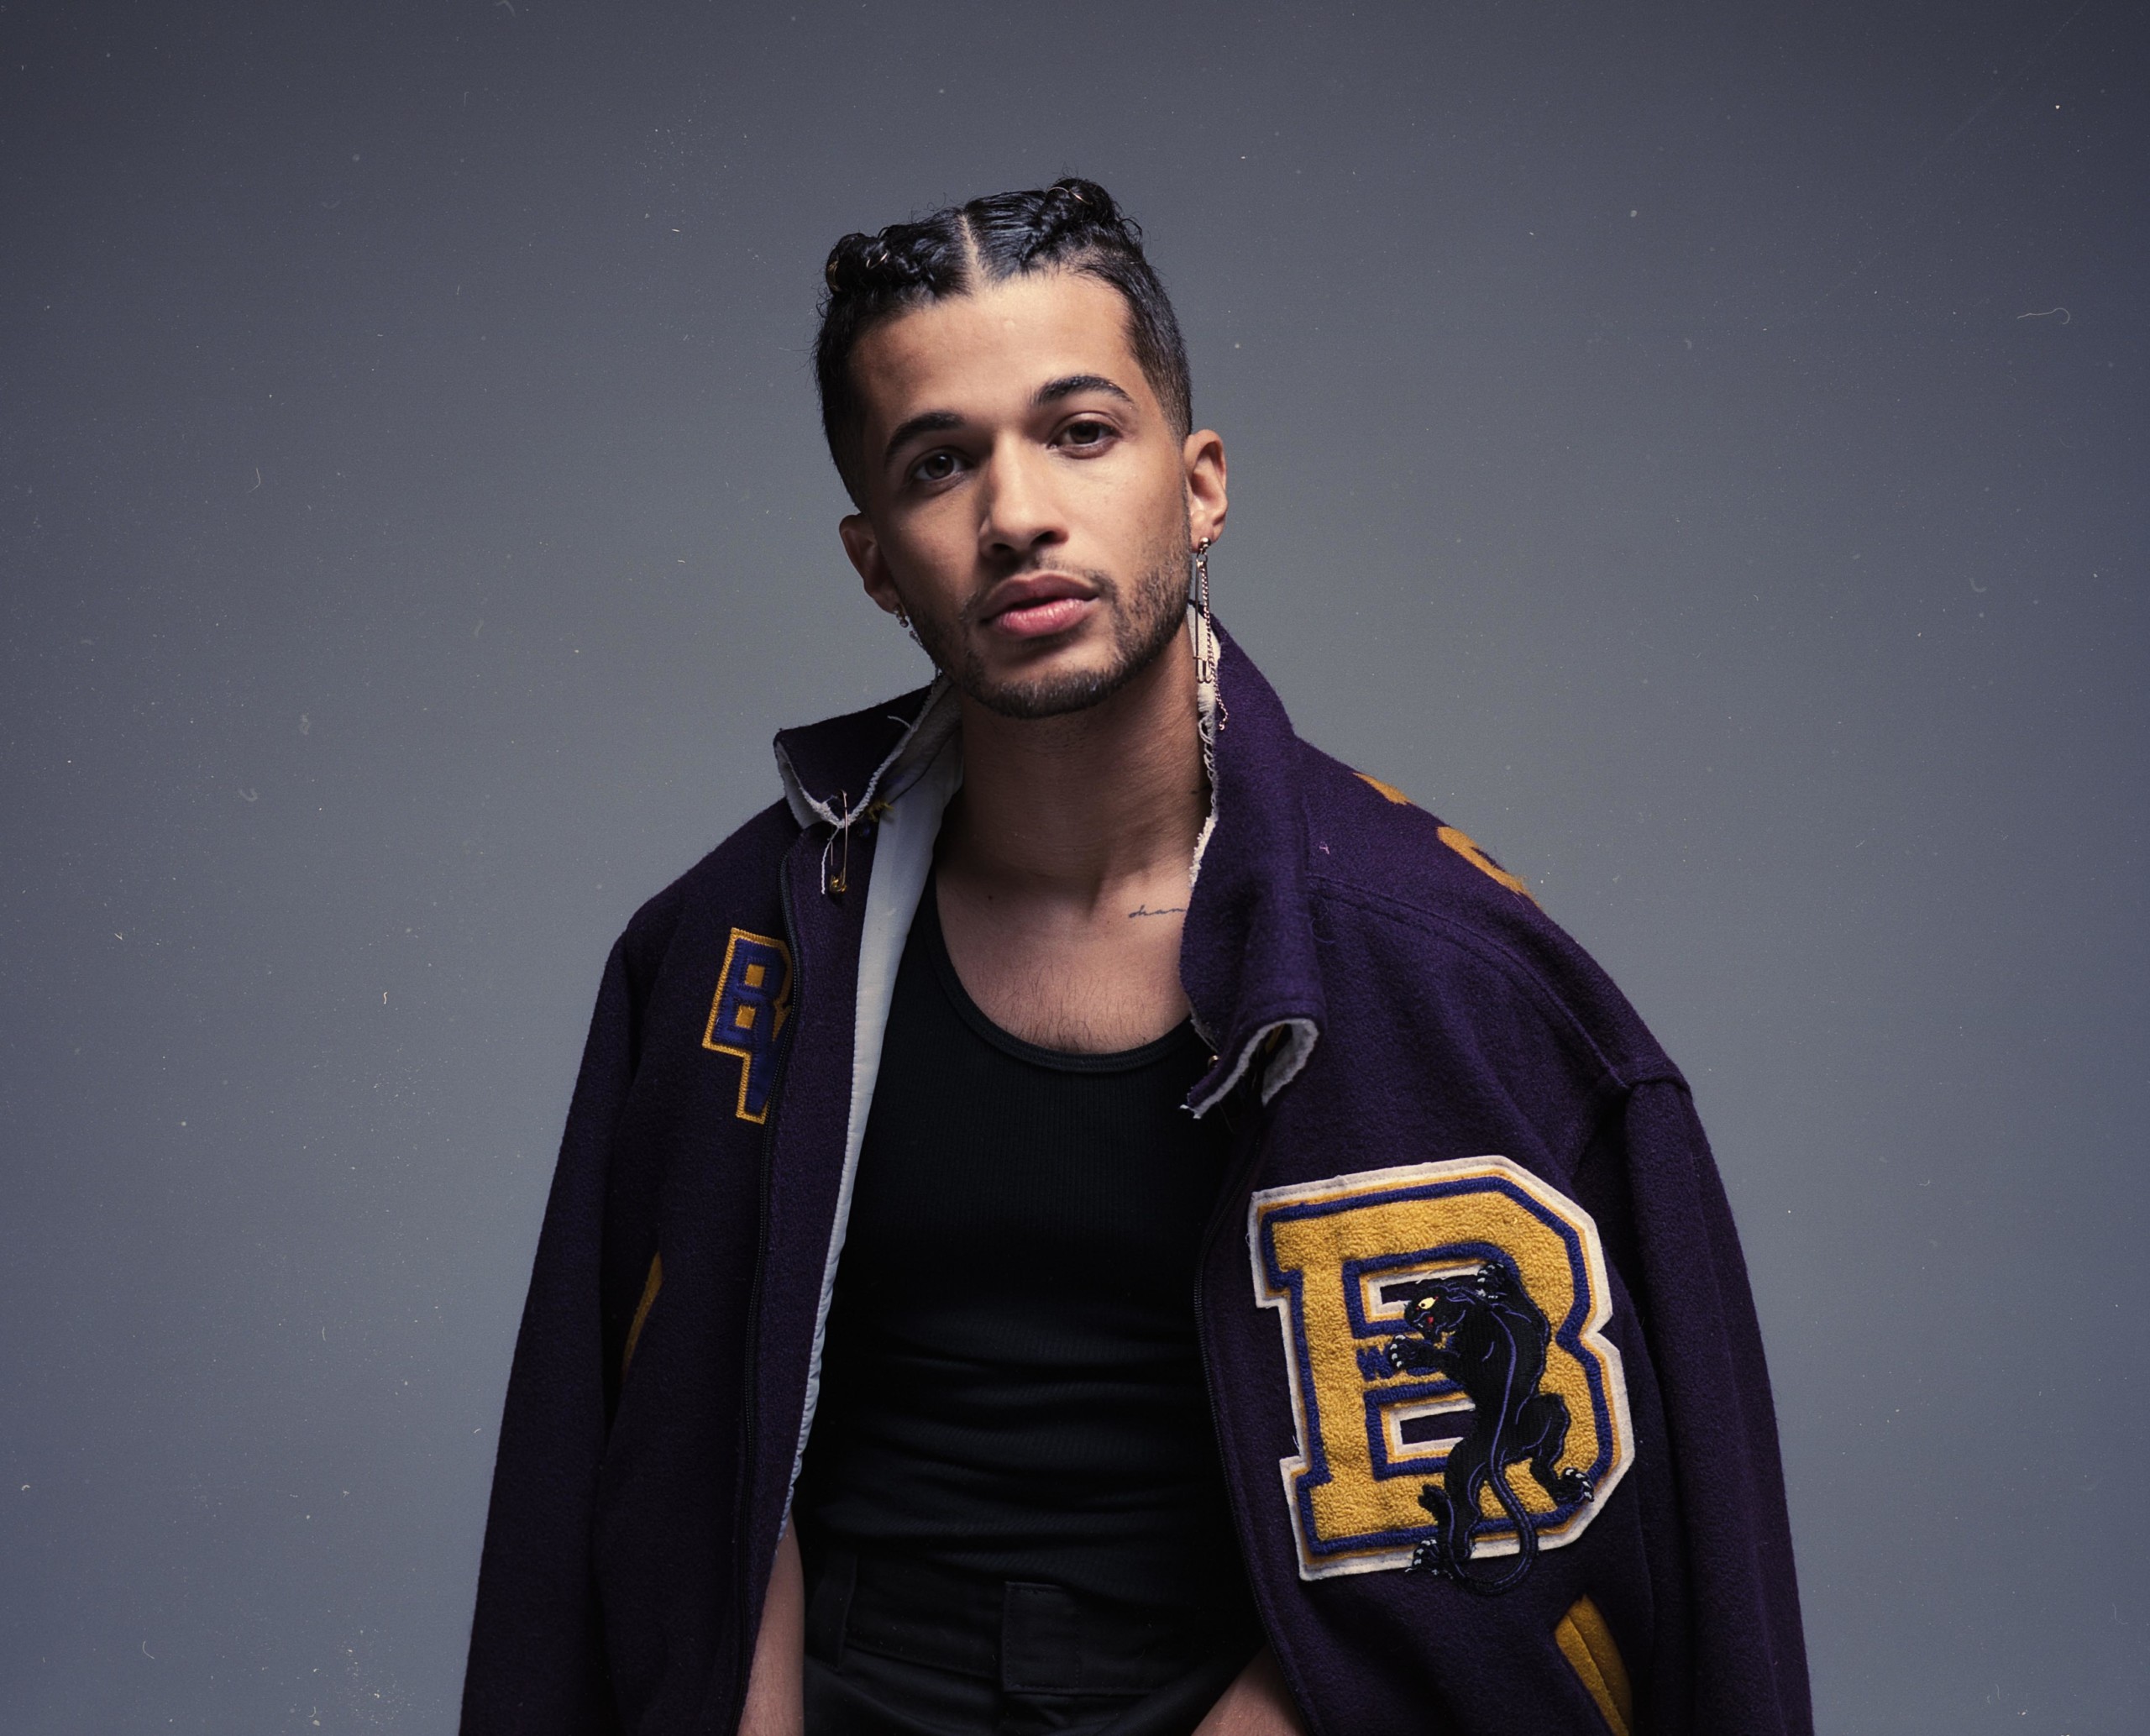 Jordan Fisher wears a jacket by Toussaint L'Overture and shirt by Hanes. Styling by Veronica Graye. Grooming by Erica Whelan using Jaxon Lane. Braids by Star Appling.